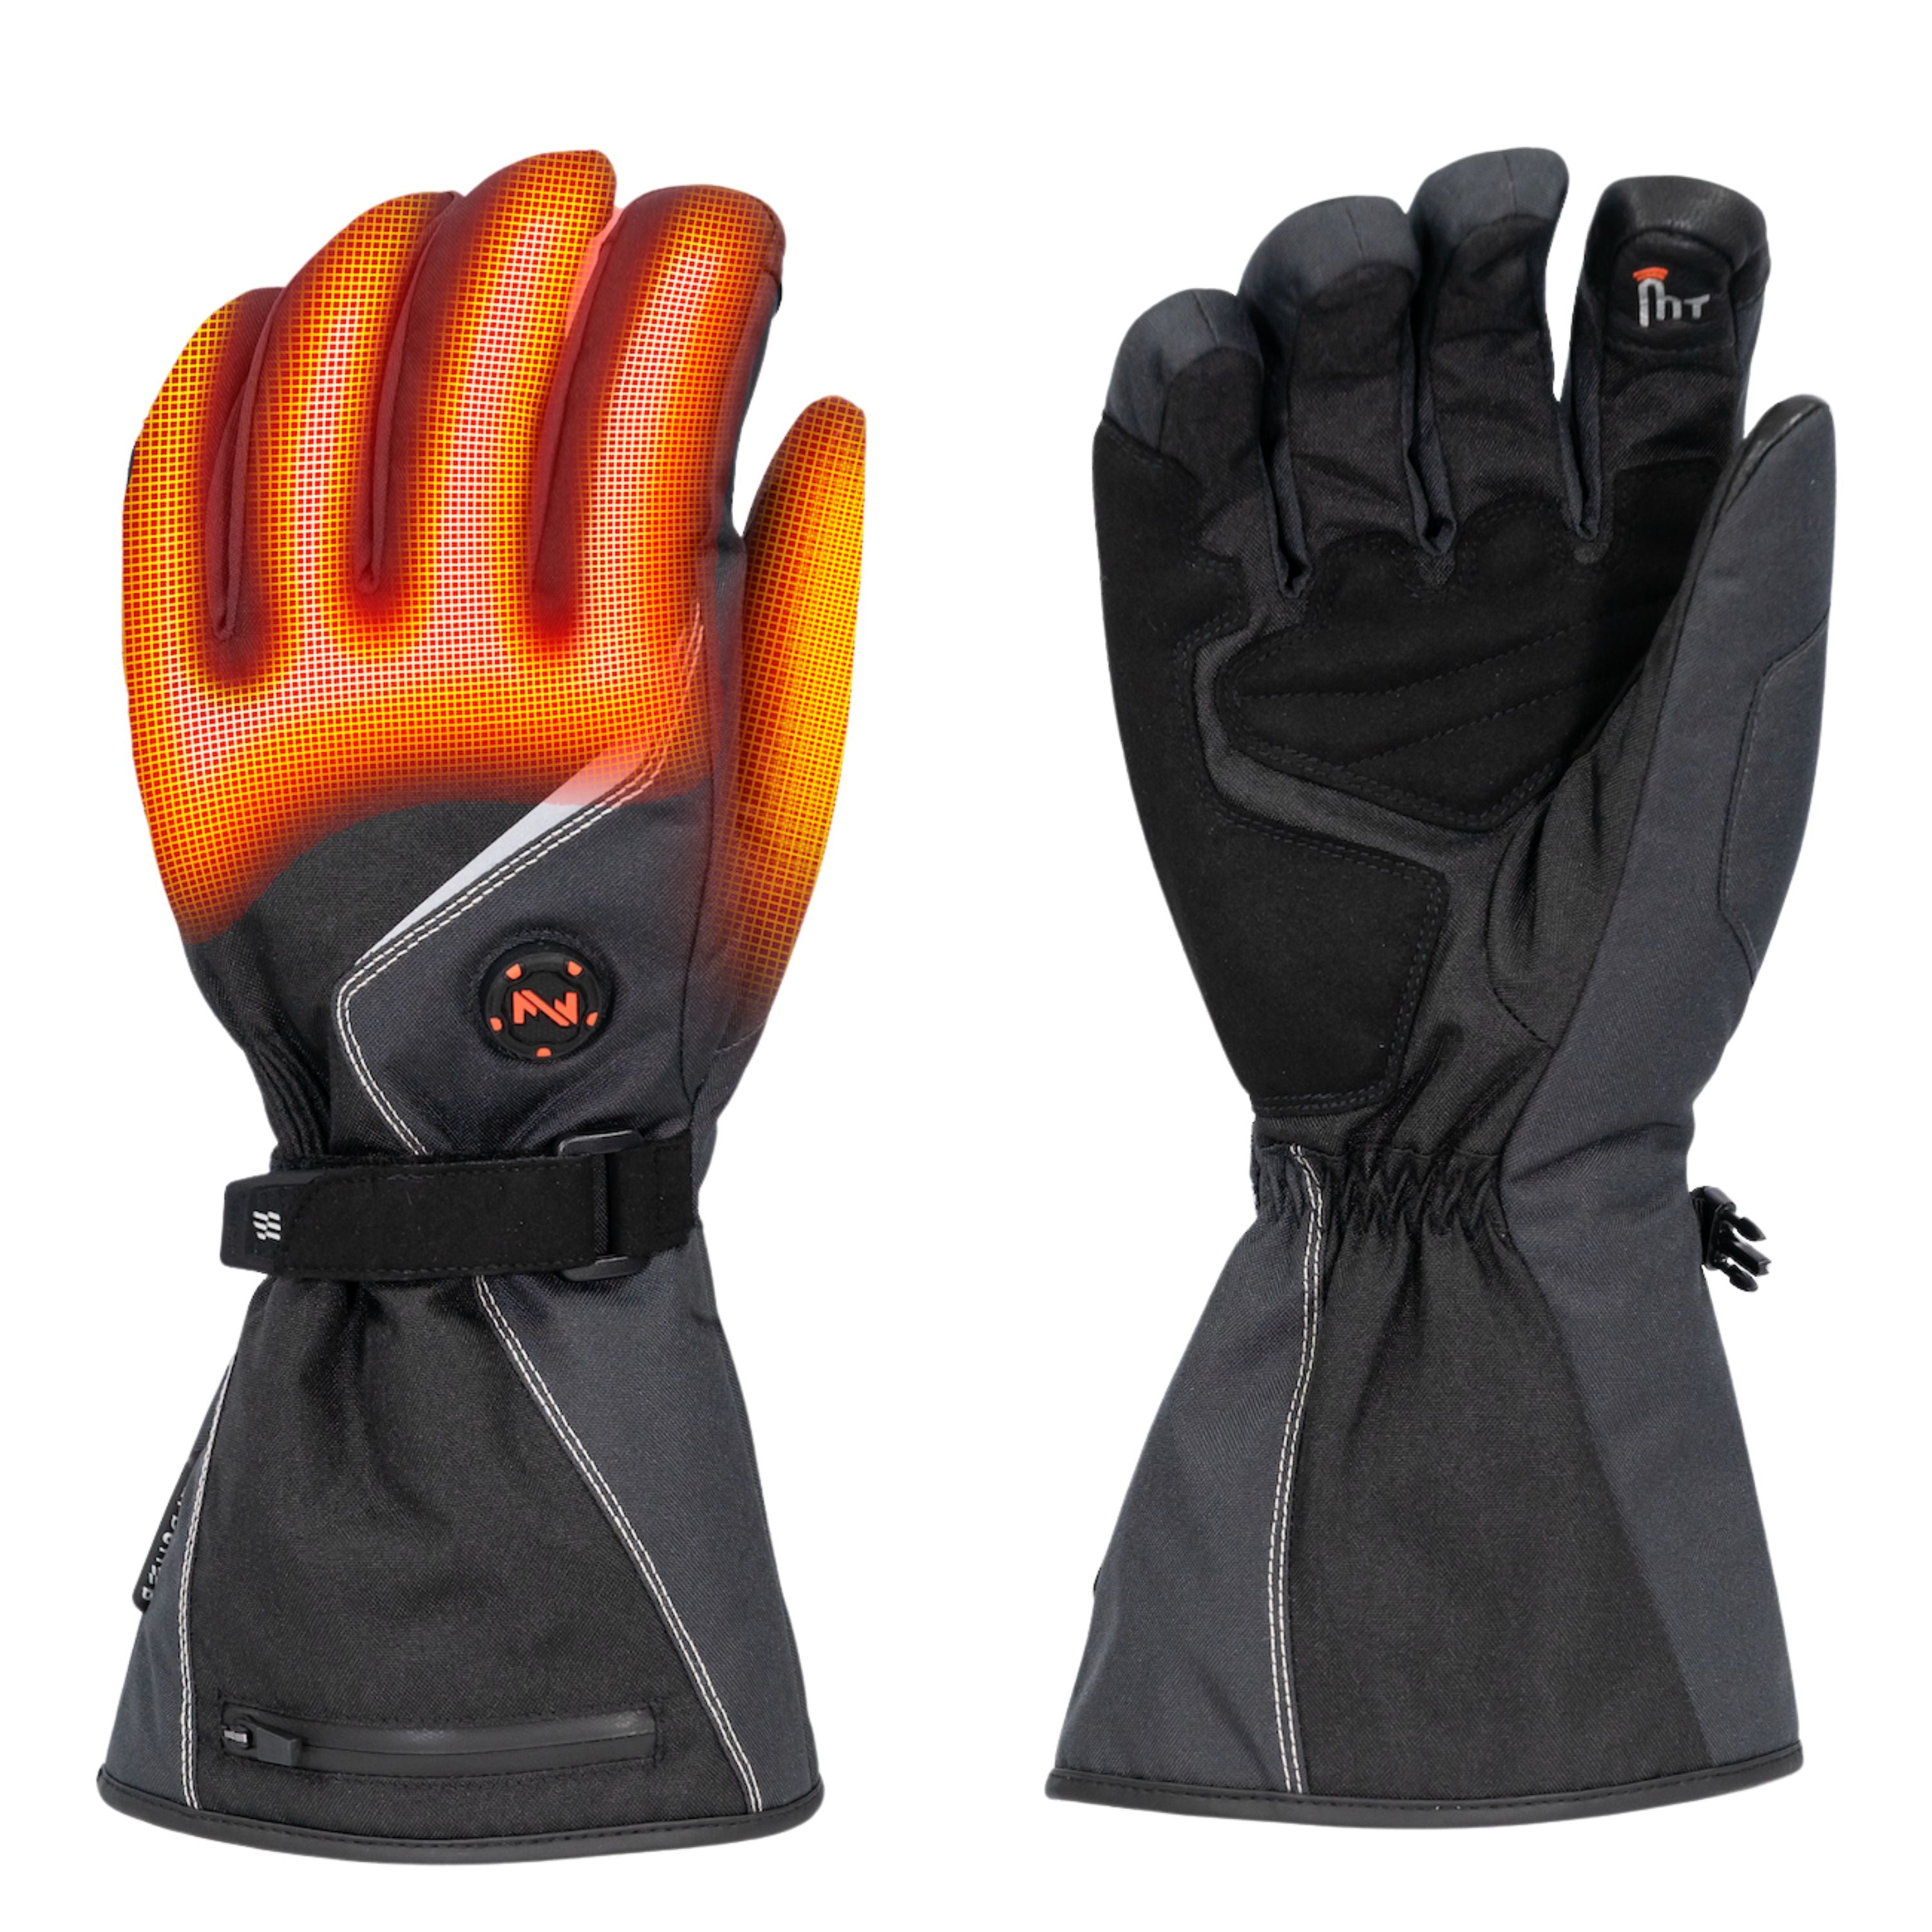 "Squall" Heated gloves - Unisex